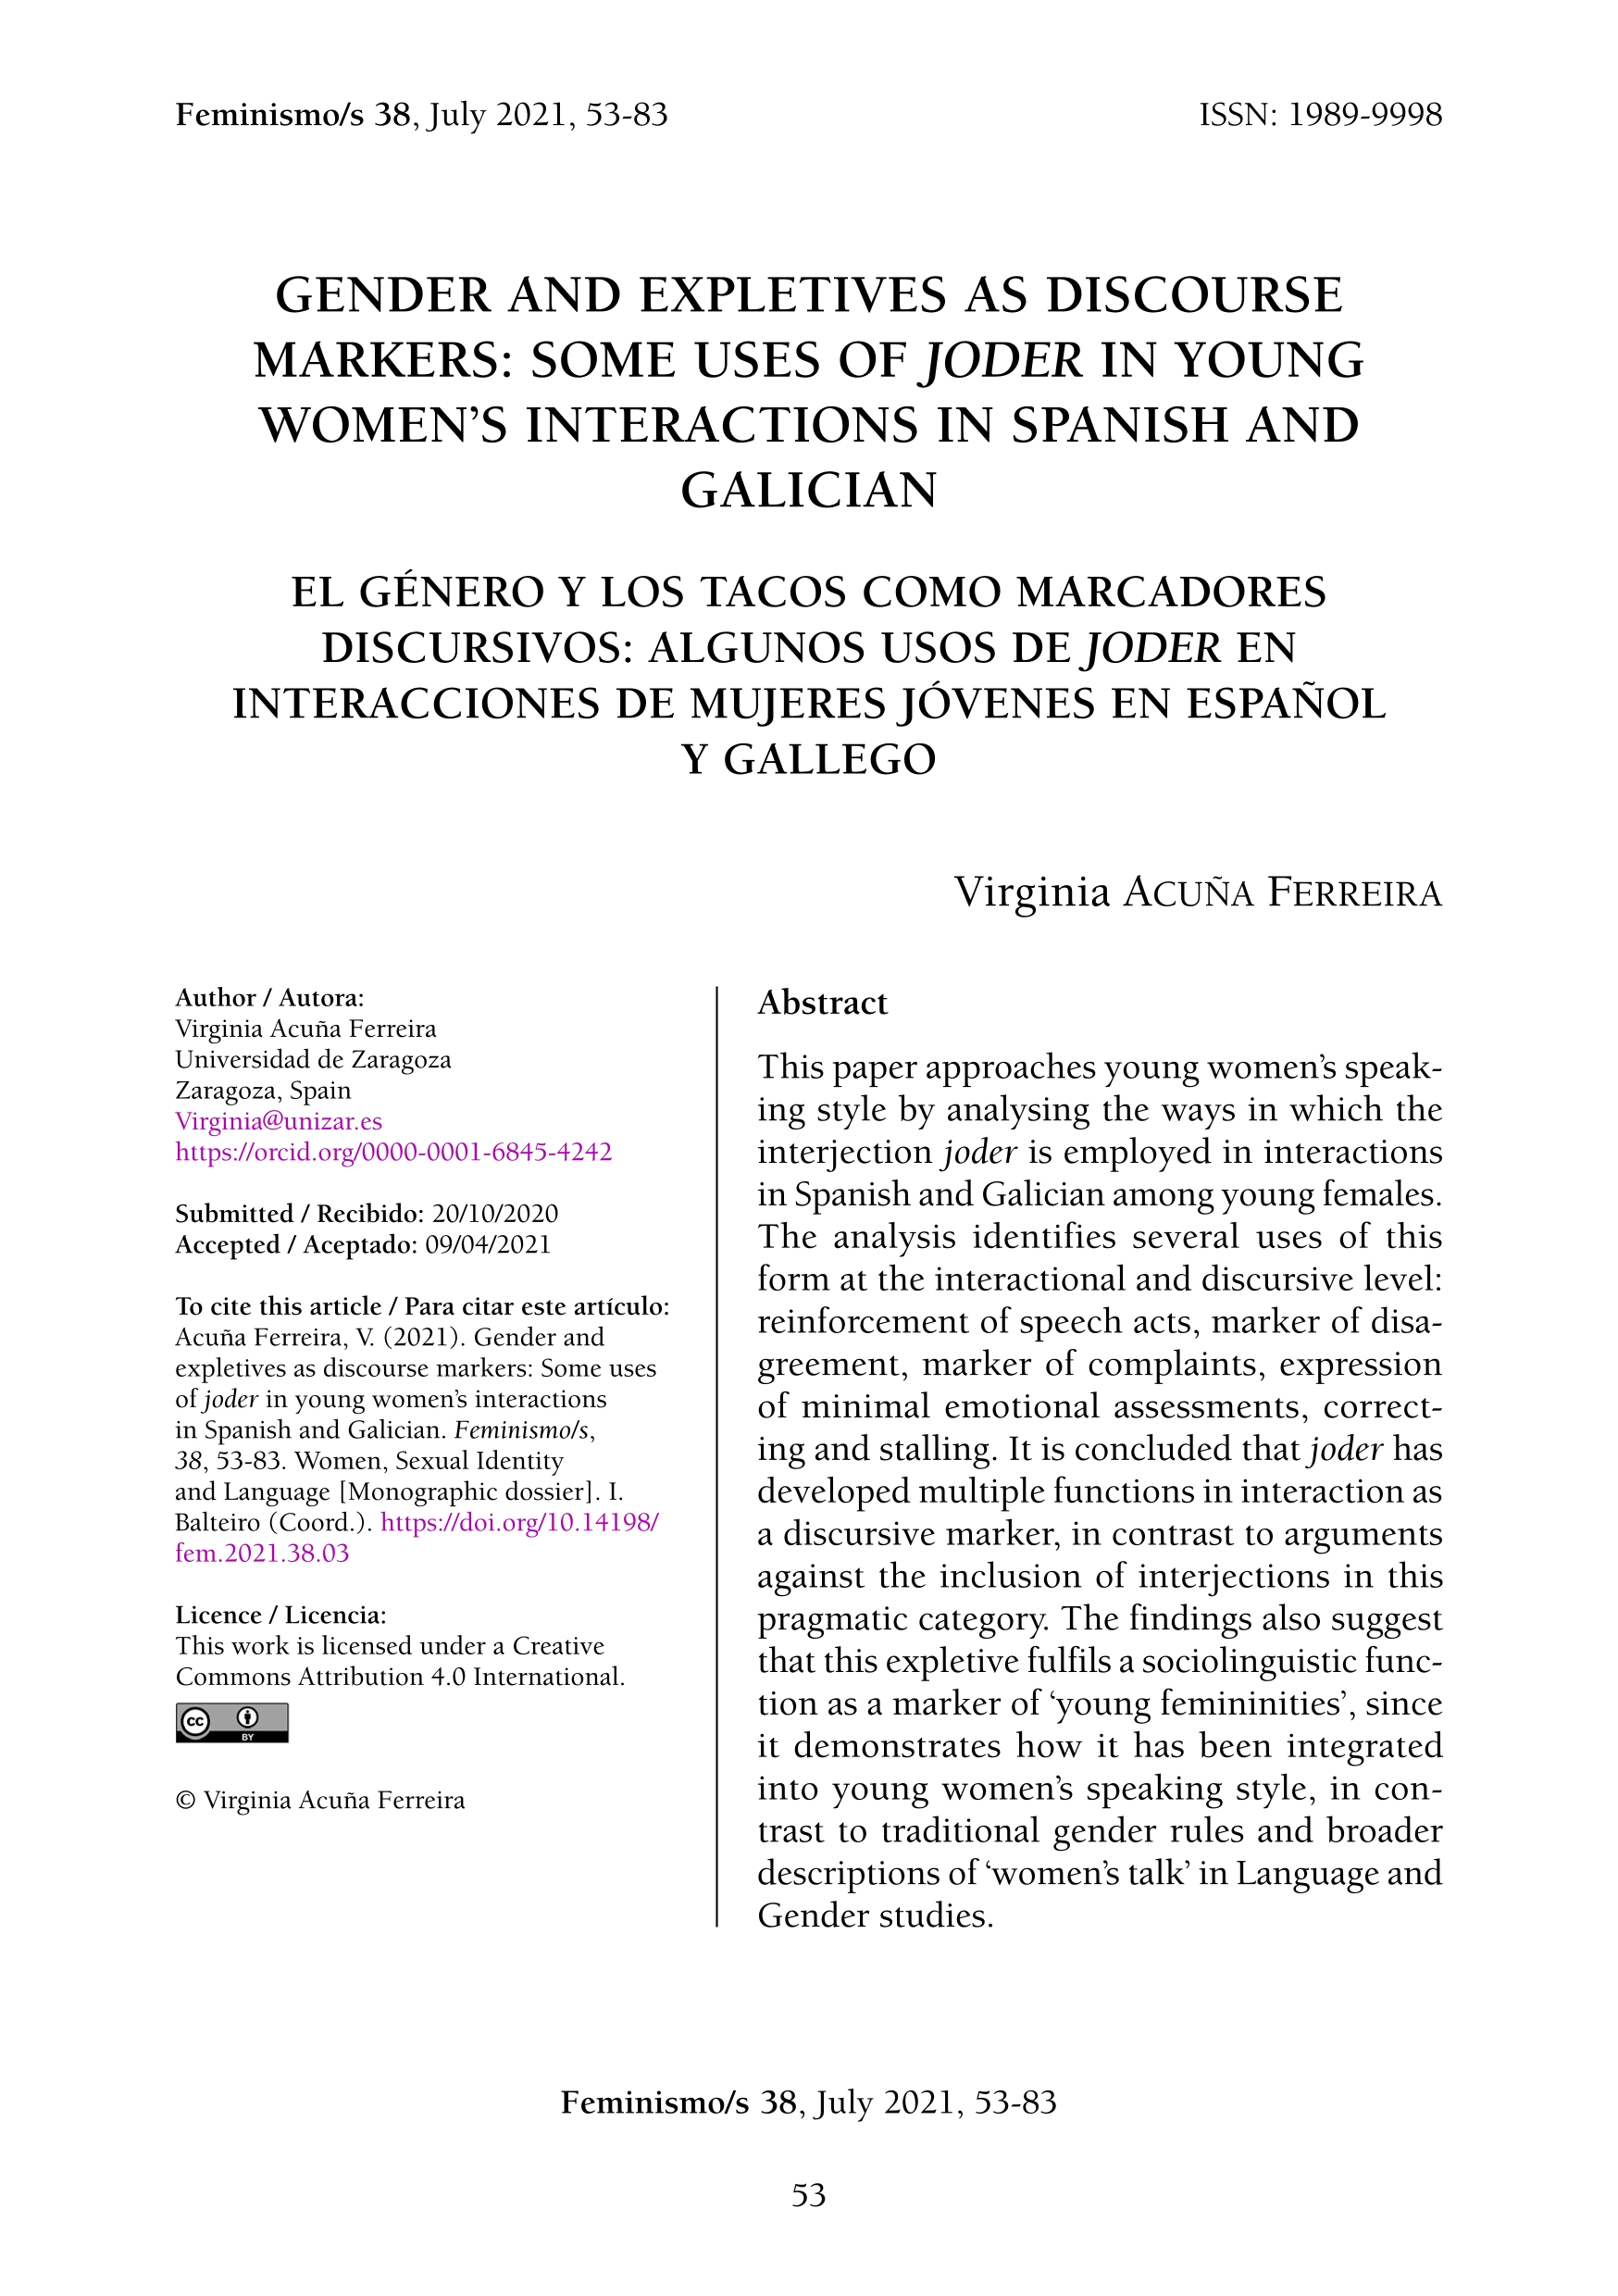 Gender and expletives as discourse markers some uses of joder in young womens interactions in spanish and galician